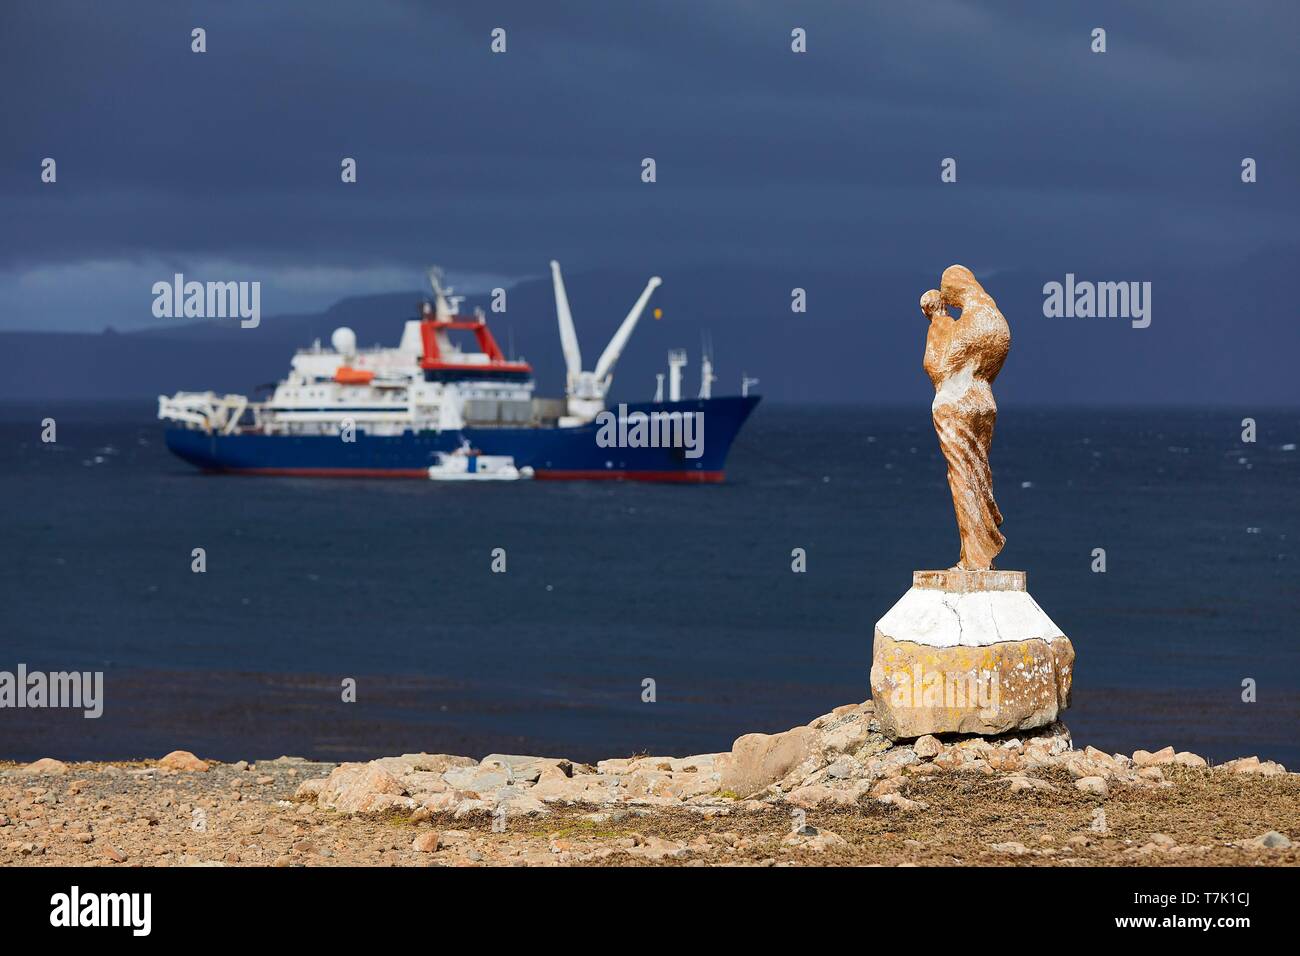 France, French Southern and Antarctic Territories (TAAF), Kerguelen Islands, Port-aux-Français, statue of Notre-Dame-des Vents on the coast in front of the Marion Dufresne (supply ship of French Southern and Antarctic Territories) at anchor Stock Photo